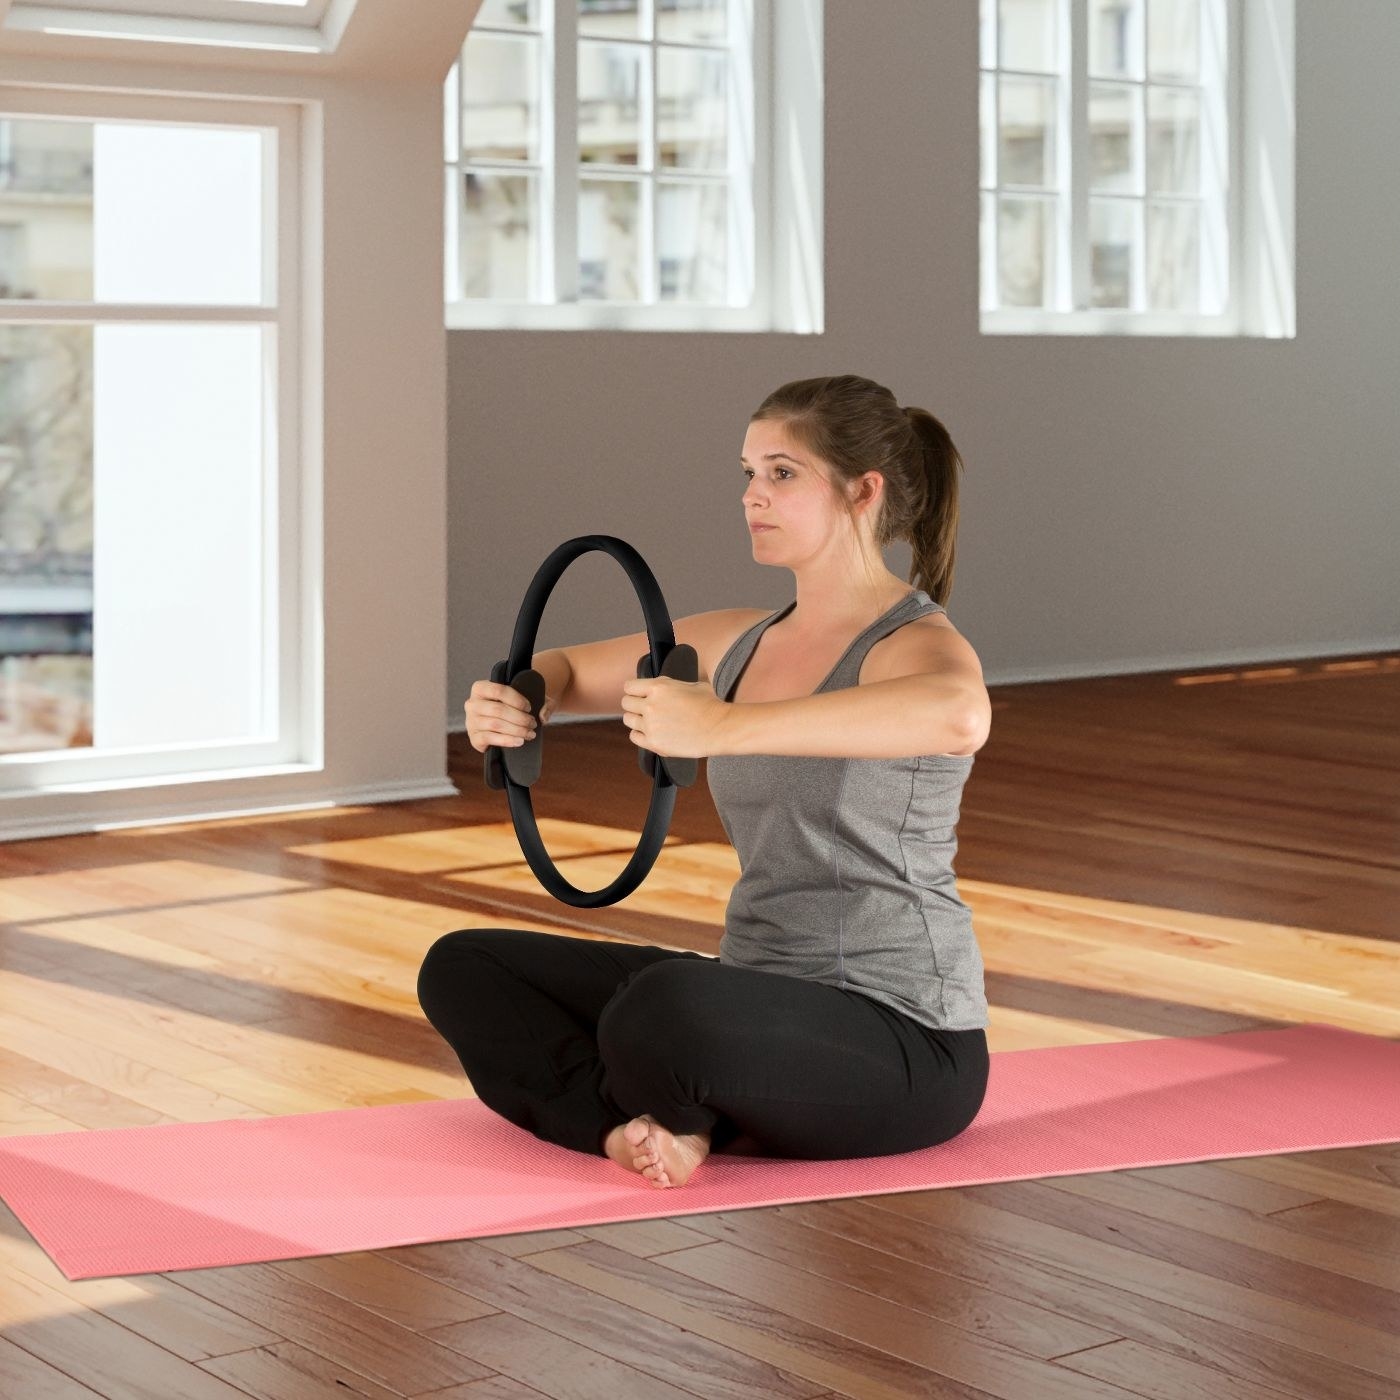 A woman sits crosslegged on a yoga mat and holds a Pilates ring